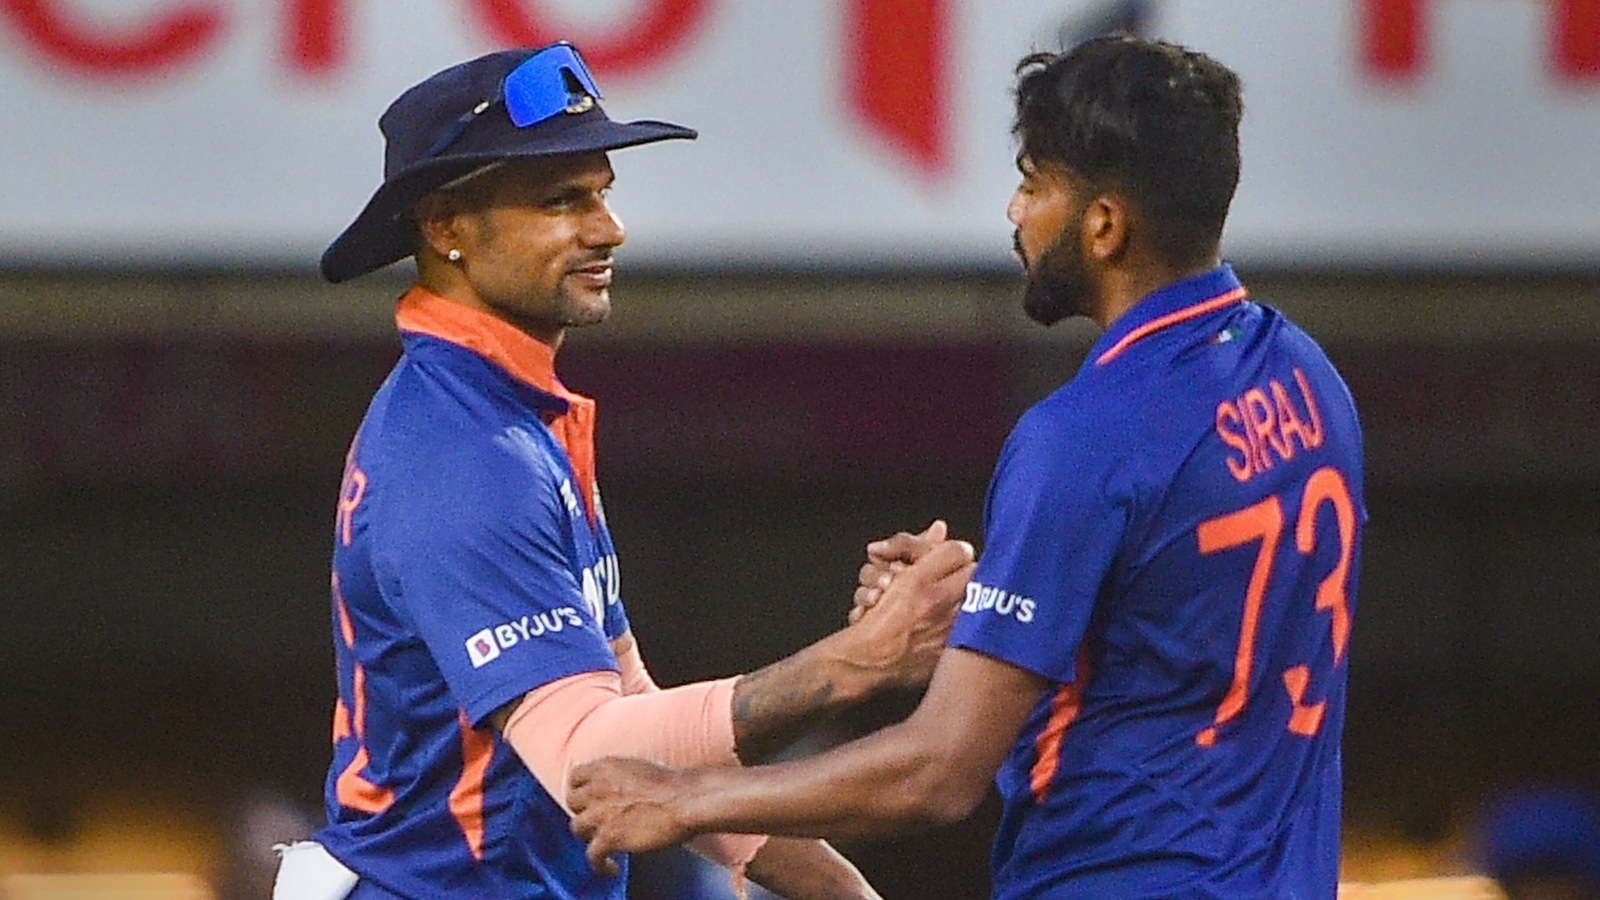 india-vs-south-africa-live-score-3rd-odi-shikhar-dhawan-wins-toss-opts-to-bowl-match-starts-at-2-00-pm